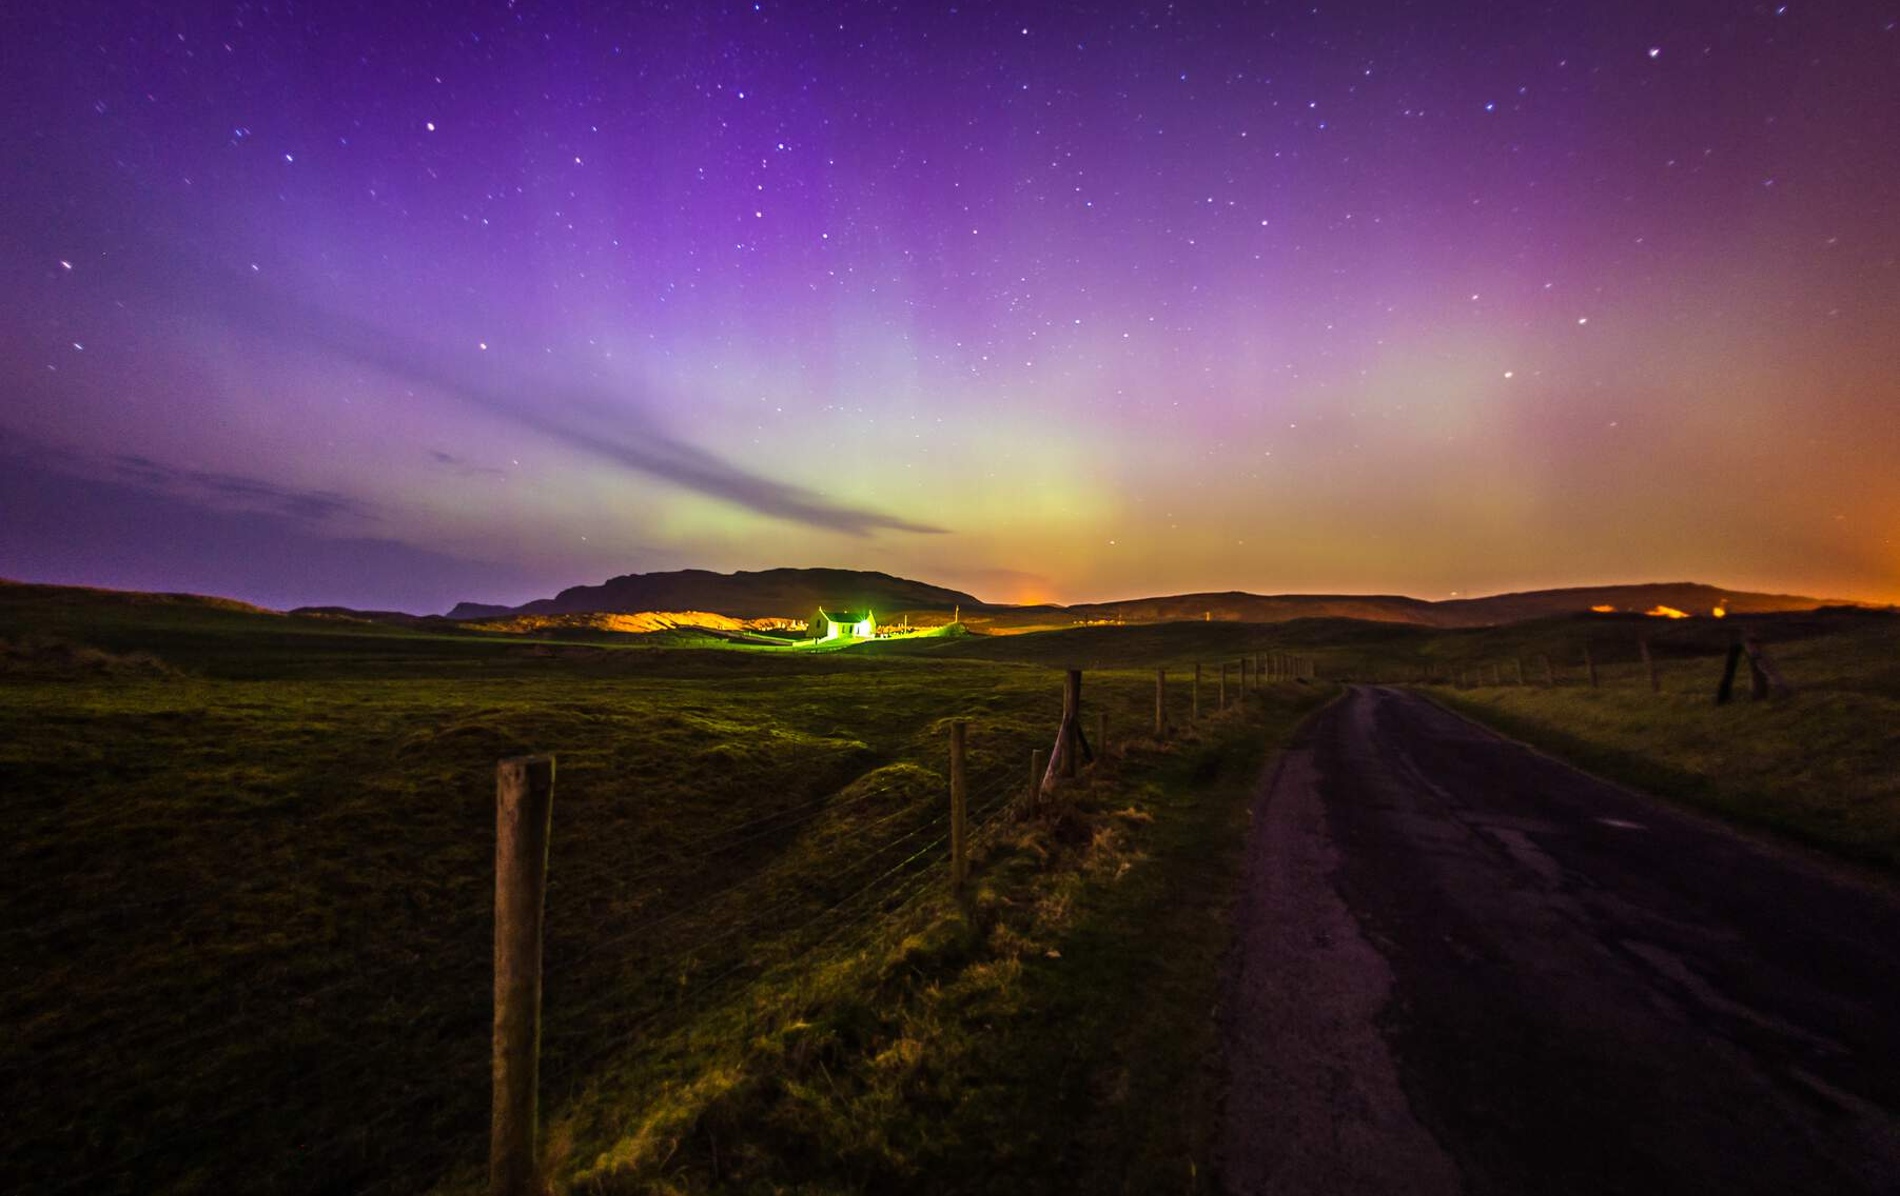 Chasing the Northern Lights in Ireland